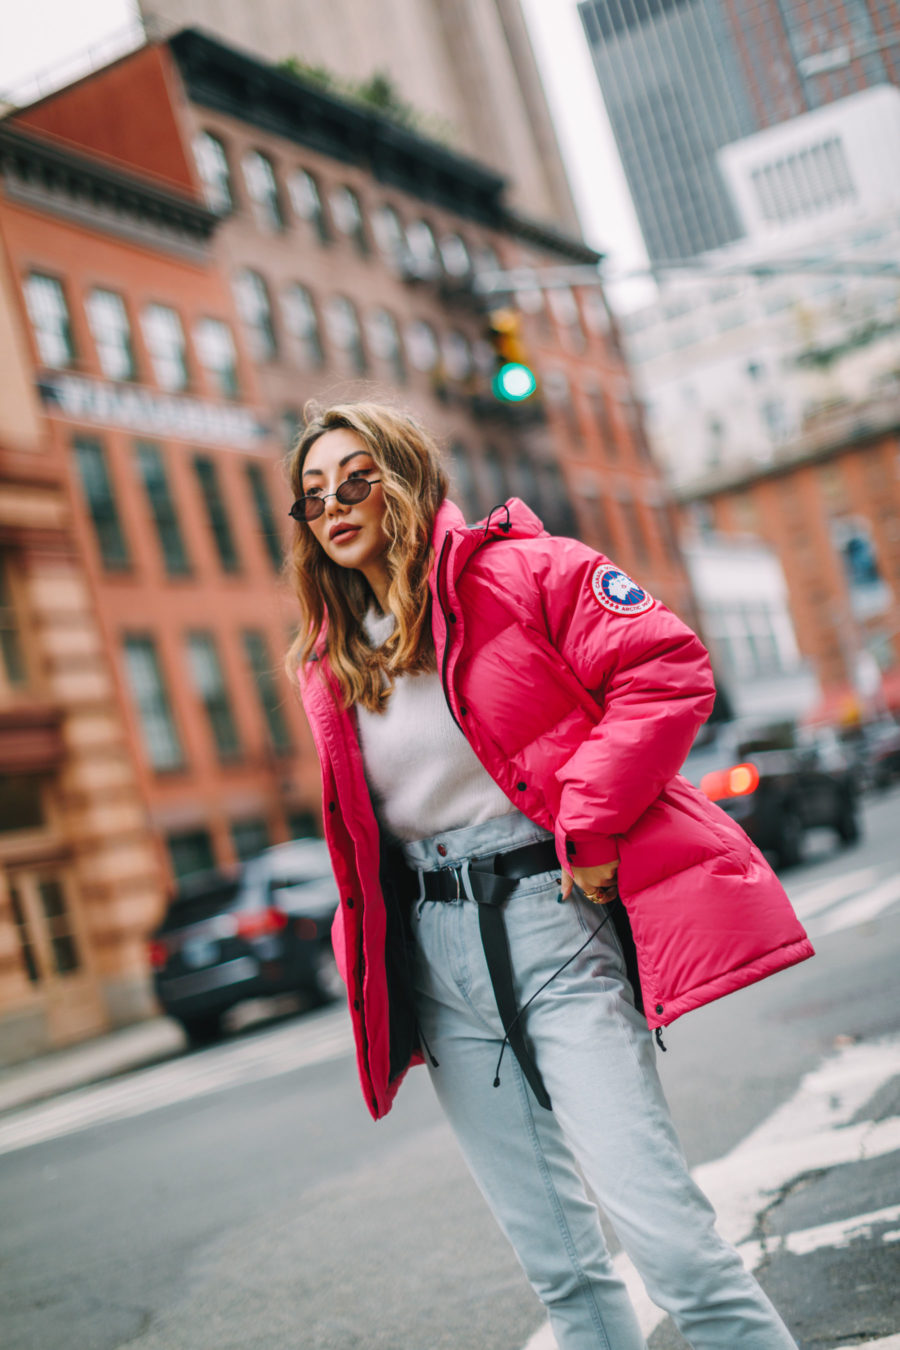 fashion blogger jessica wang shares her favorite winter coats and wears a bright pink canada goose puffer coat // Notjessfashion.com